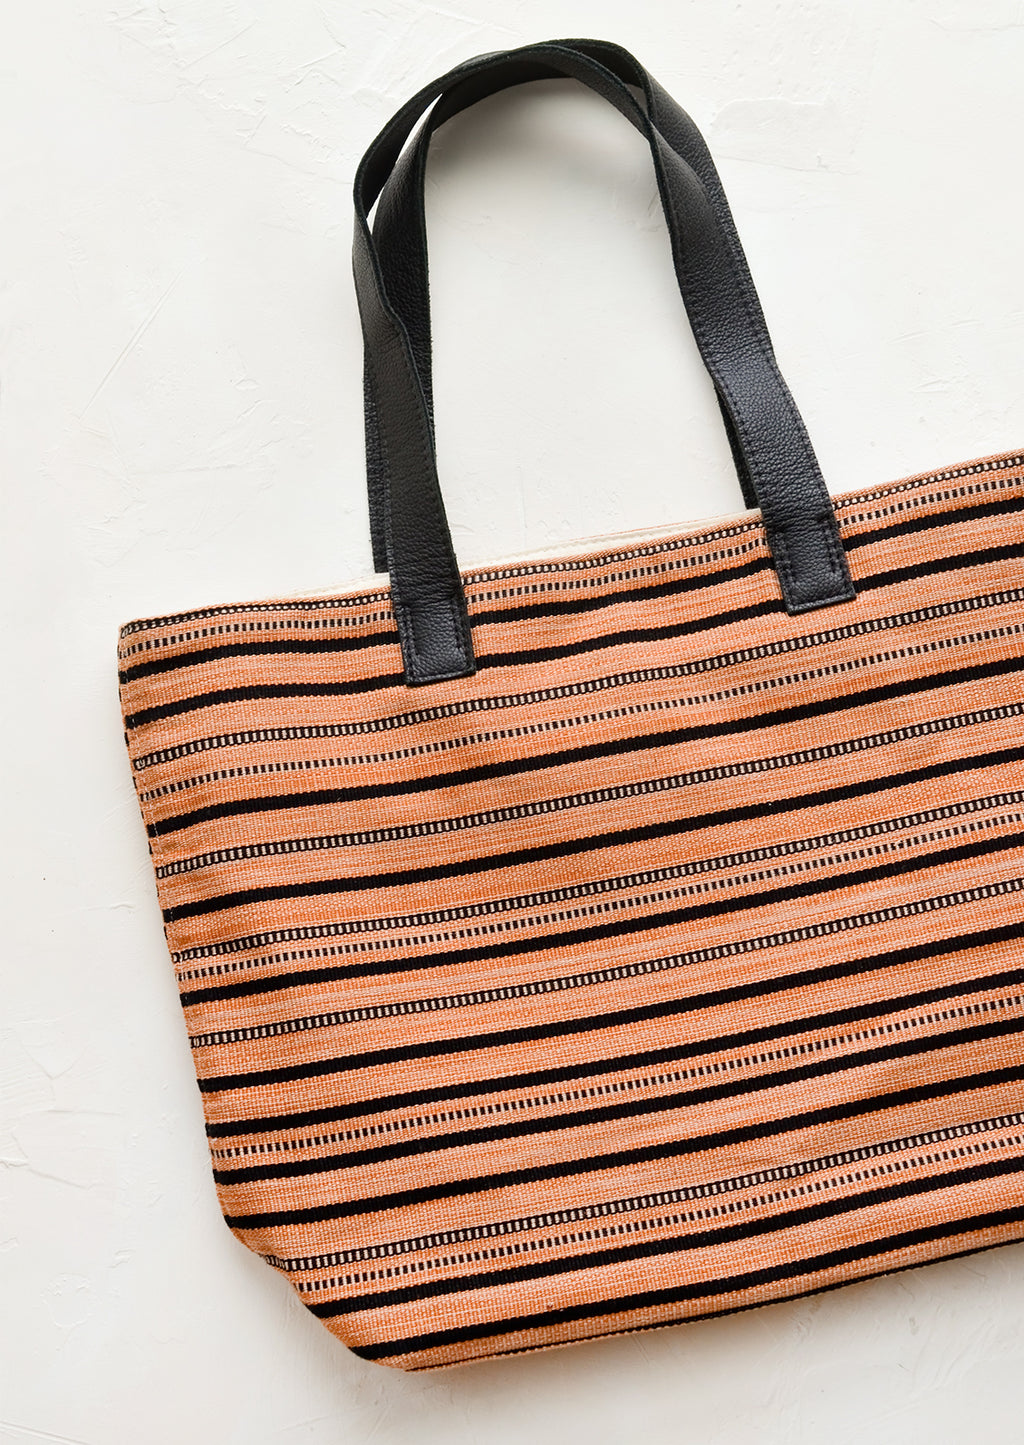 1: A striped canvas tote bag with black leather handles.